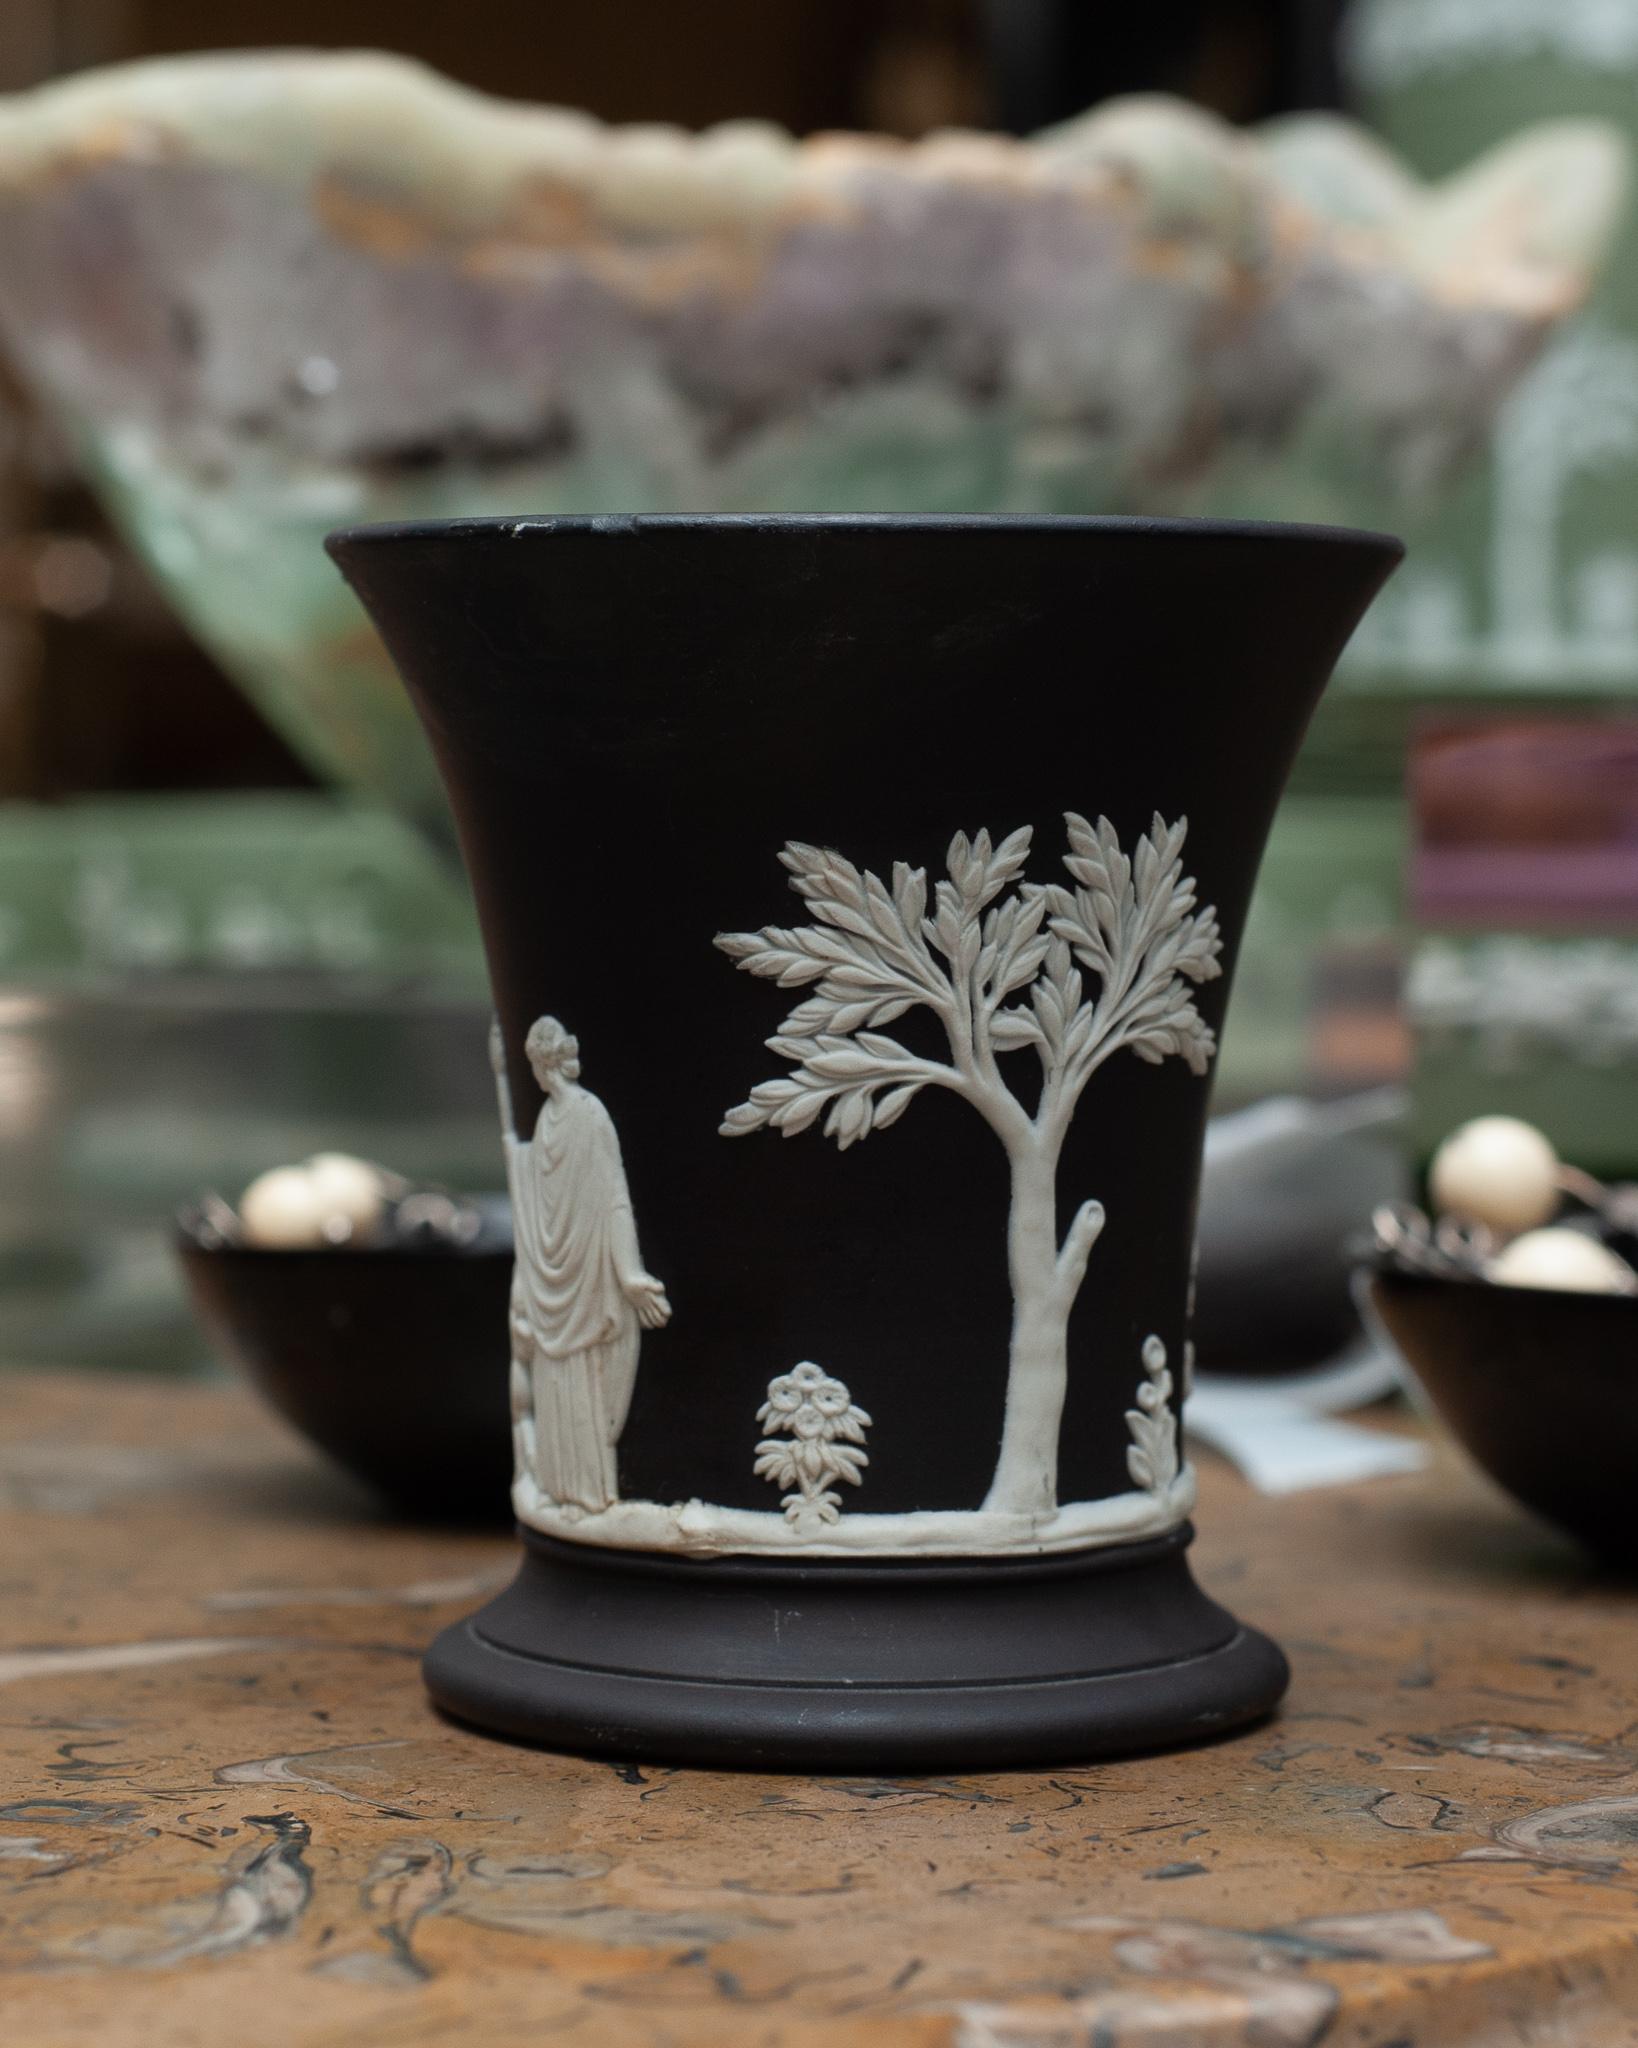 A stunning antique Wedgwood black Basalt Jasperware small vase with white overlay, circa 1964. Please note small chip in rim has been repaired previously and pictured in photos.